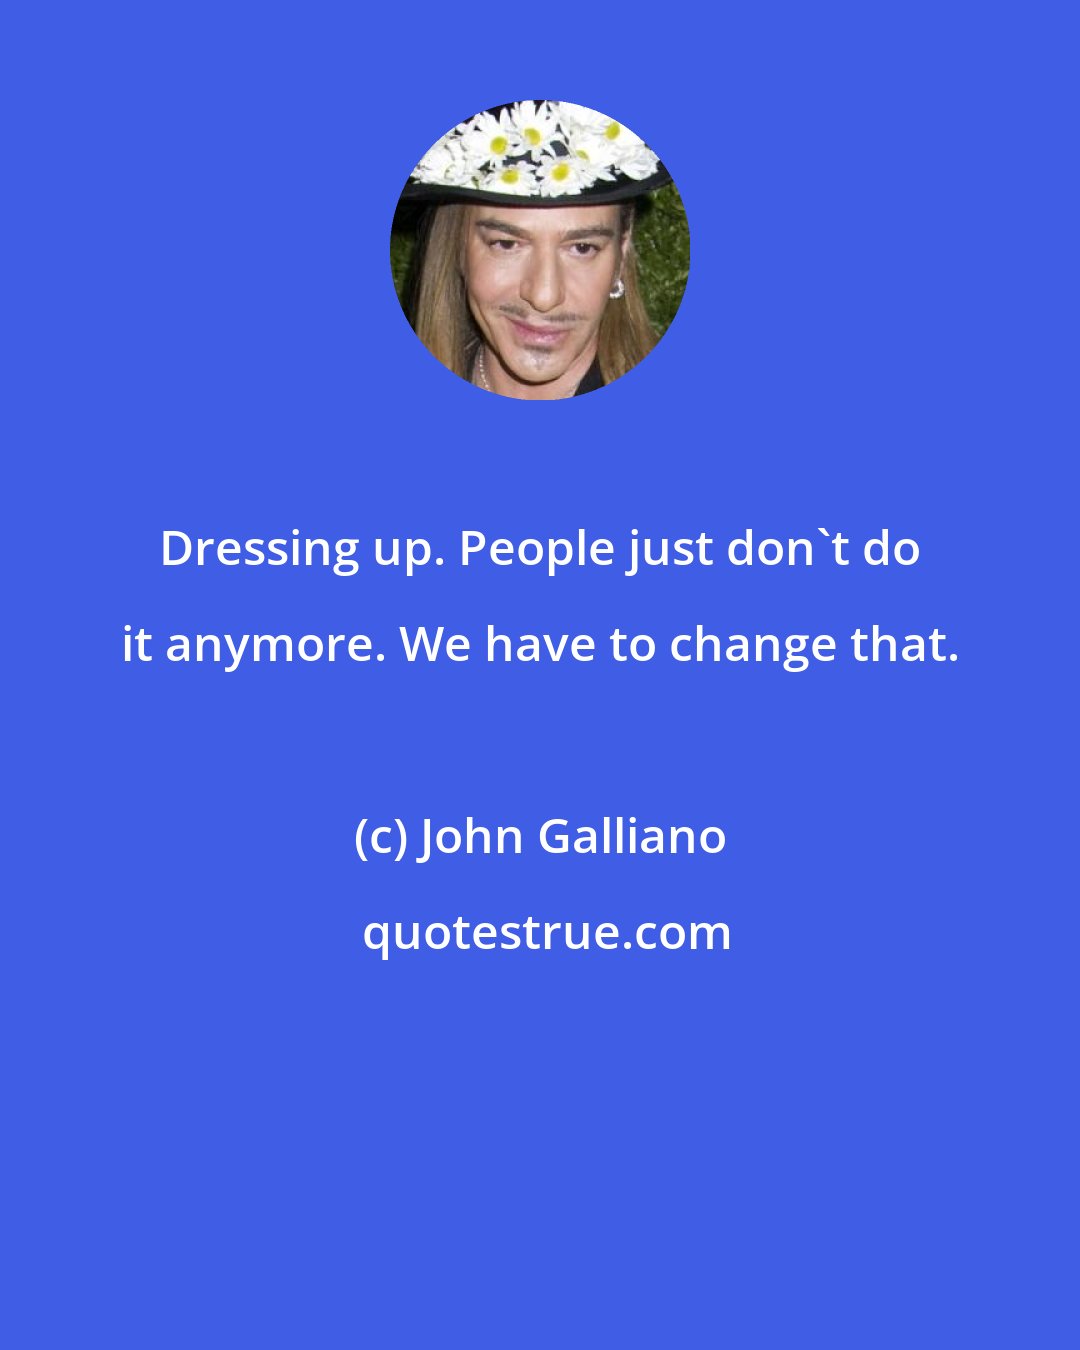 John Galliano: Dressing up. People just don't do it anymore. We have to change that.